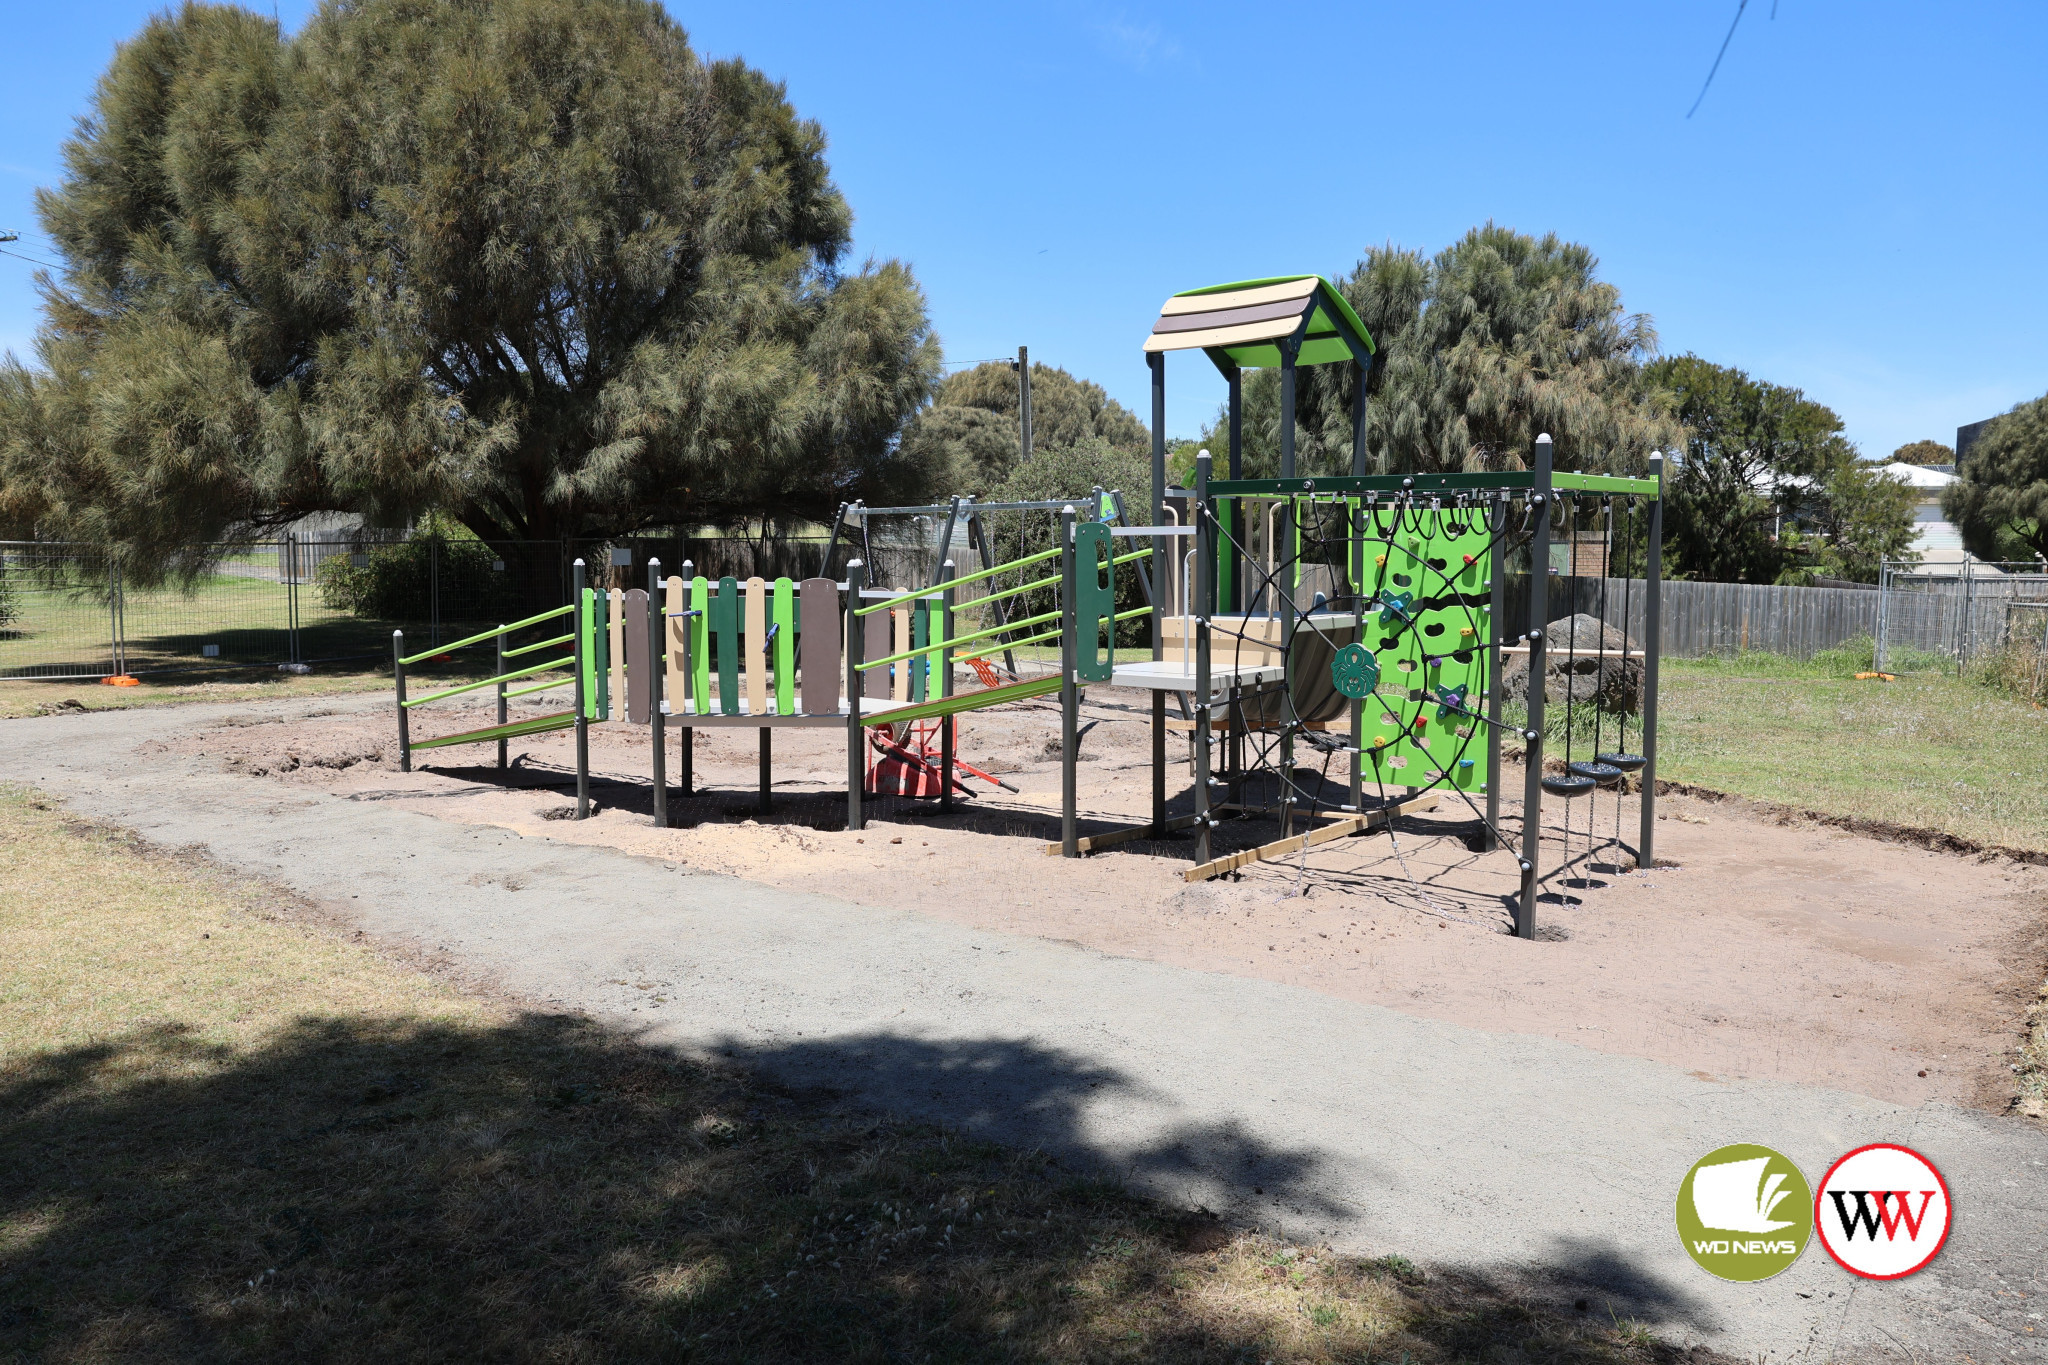 Warrnambool City Council will check all playgrounds across the city to ensure all mulch used is safe.